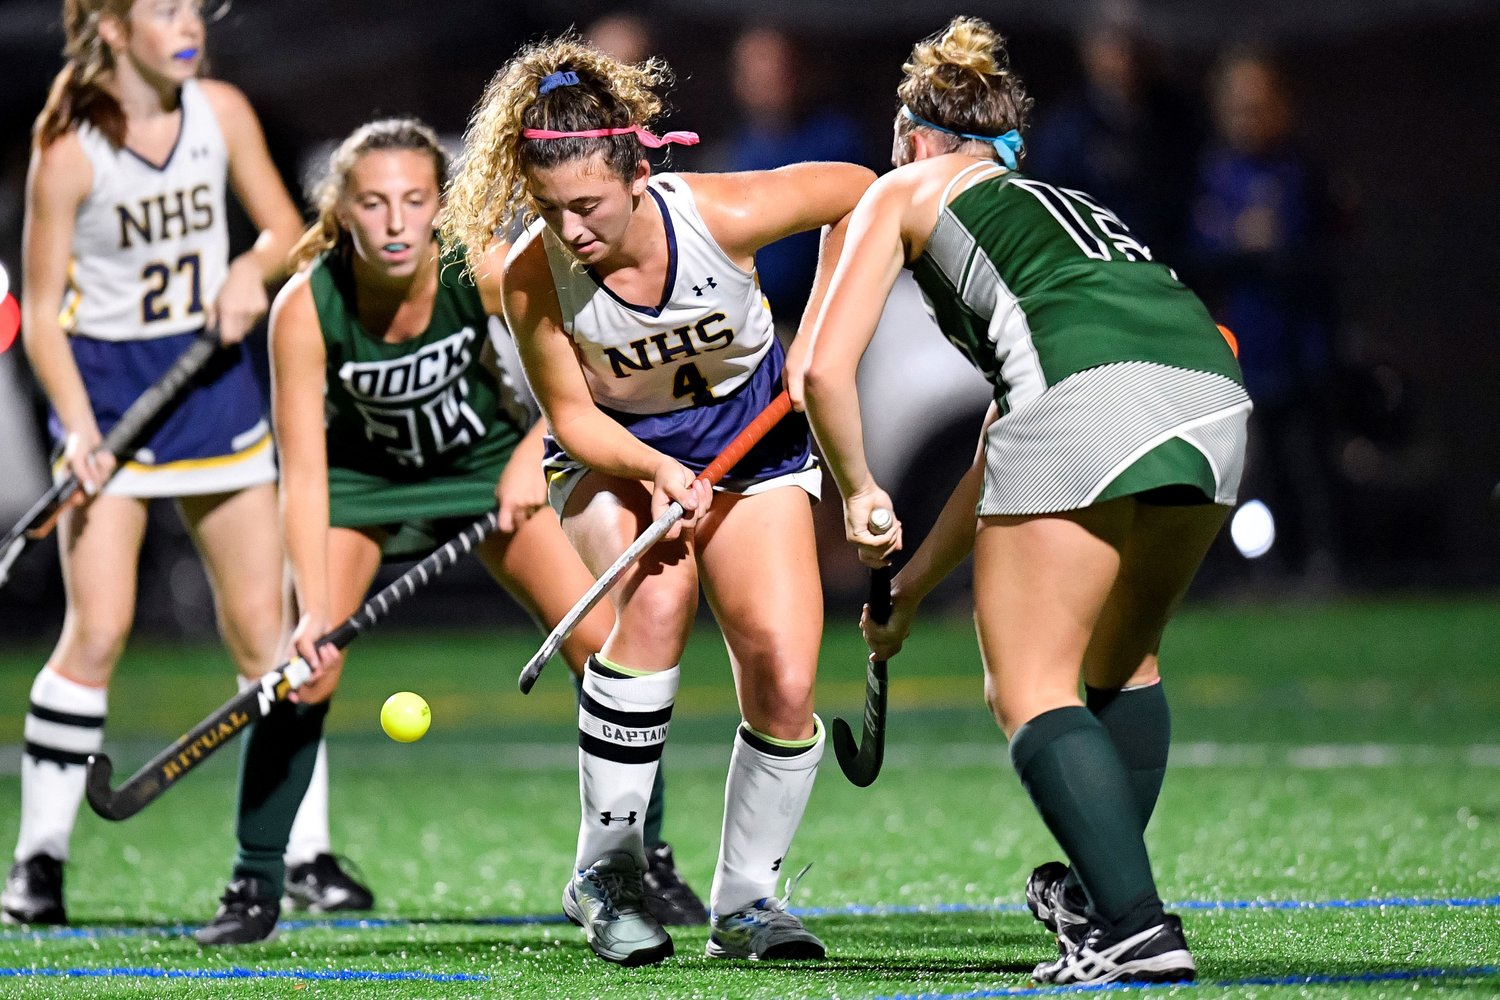 New Hope-Solebury’s Sophia Cozza battles for a loose ball in between Dock’s Erin Milesand and Olivia Zaskoda.